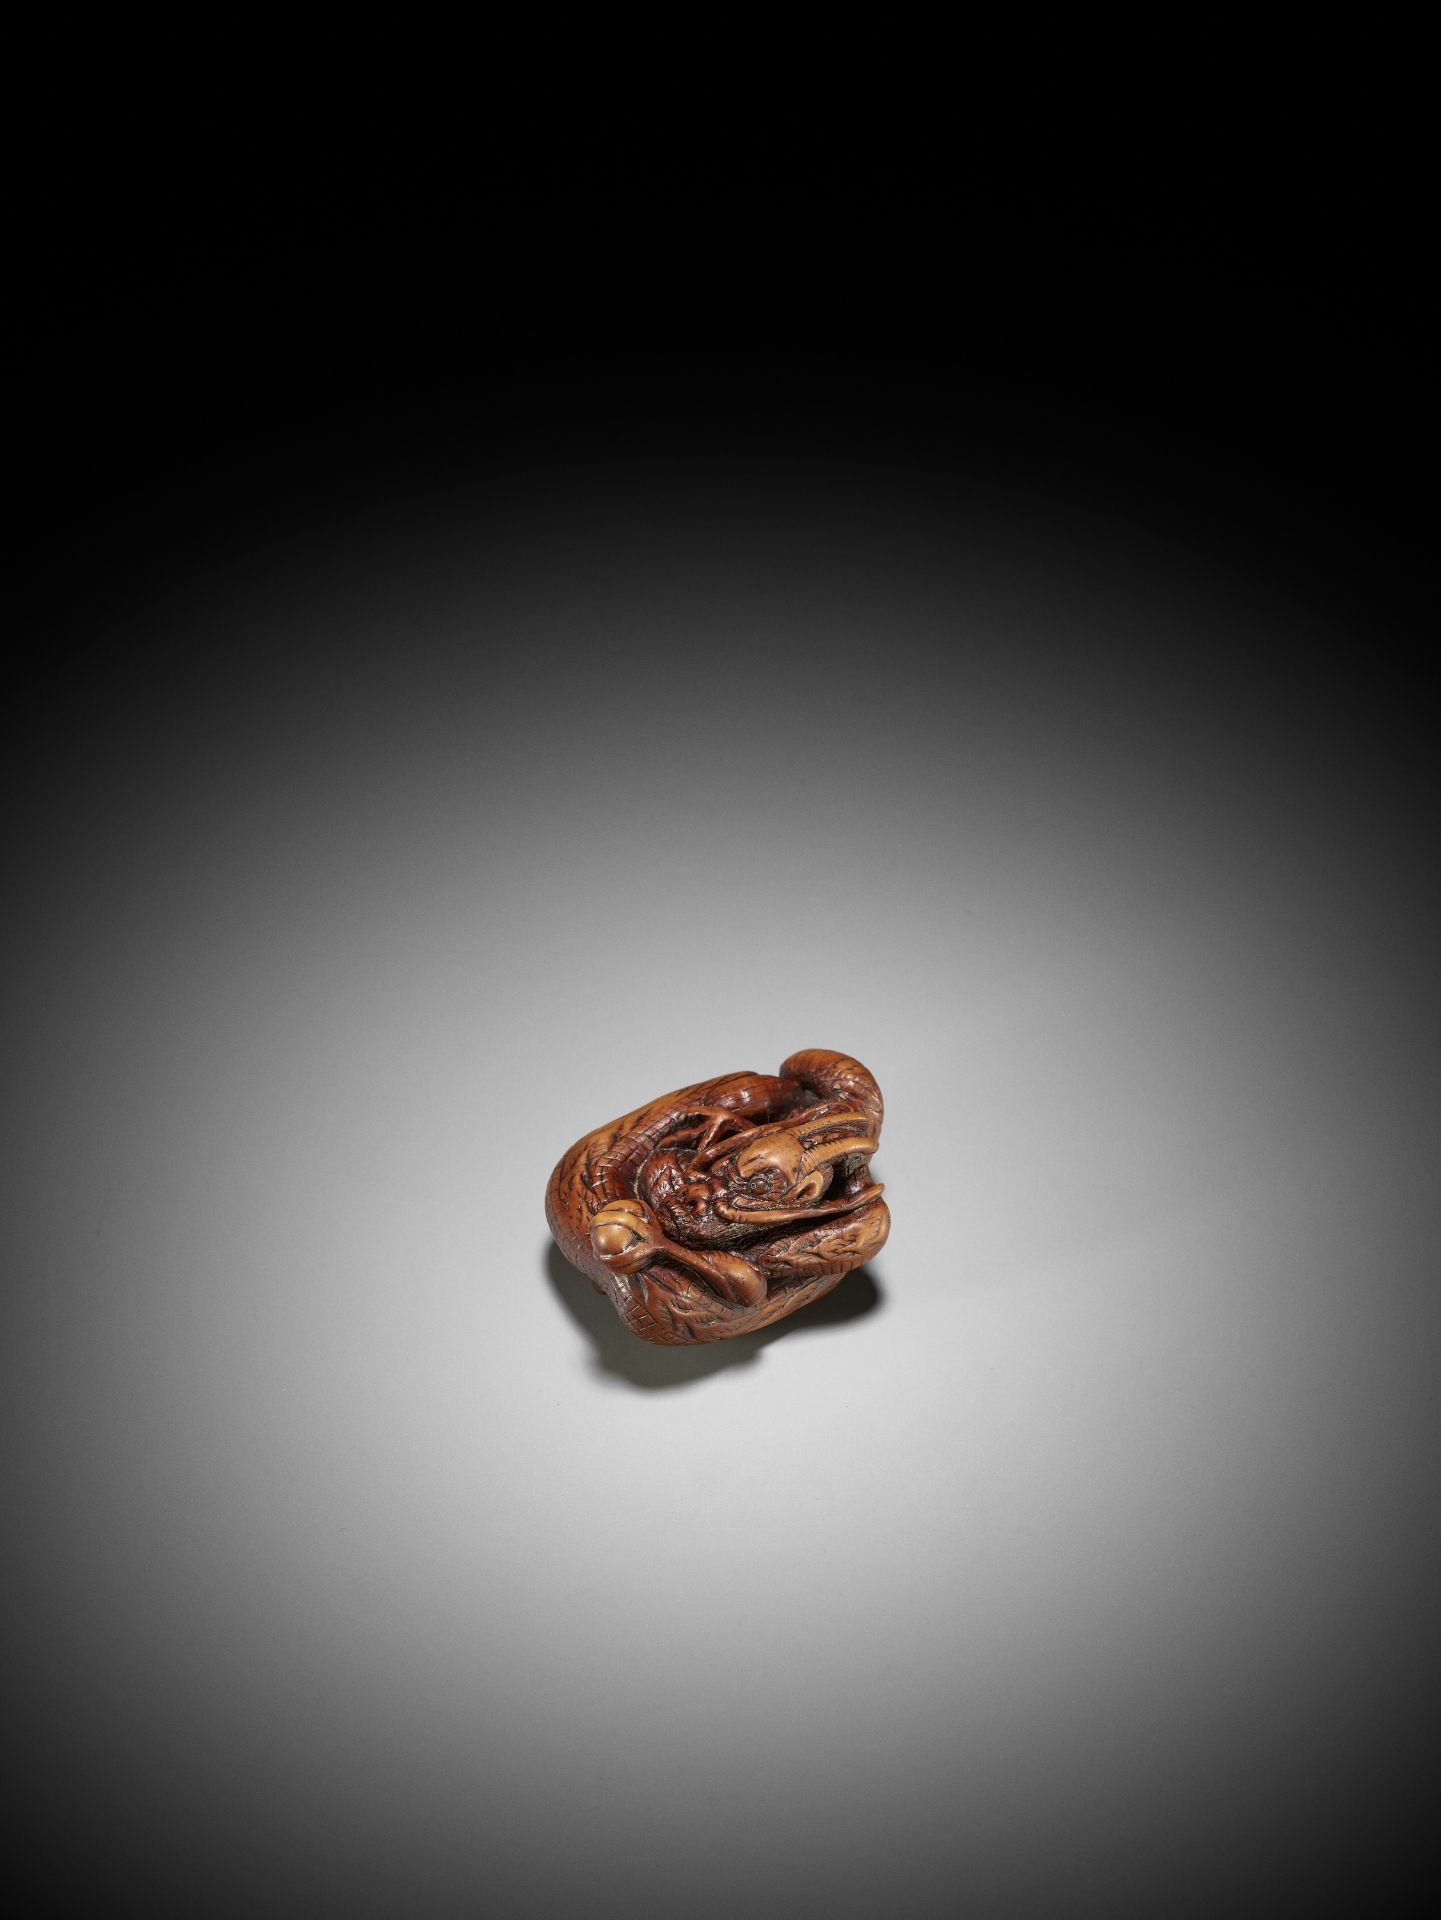 A SUPERB WOOD NETSUKE OF A COILED DRAGON - Image 2 of 14